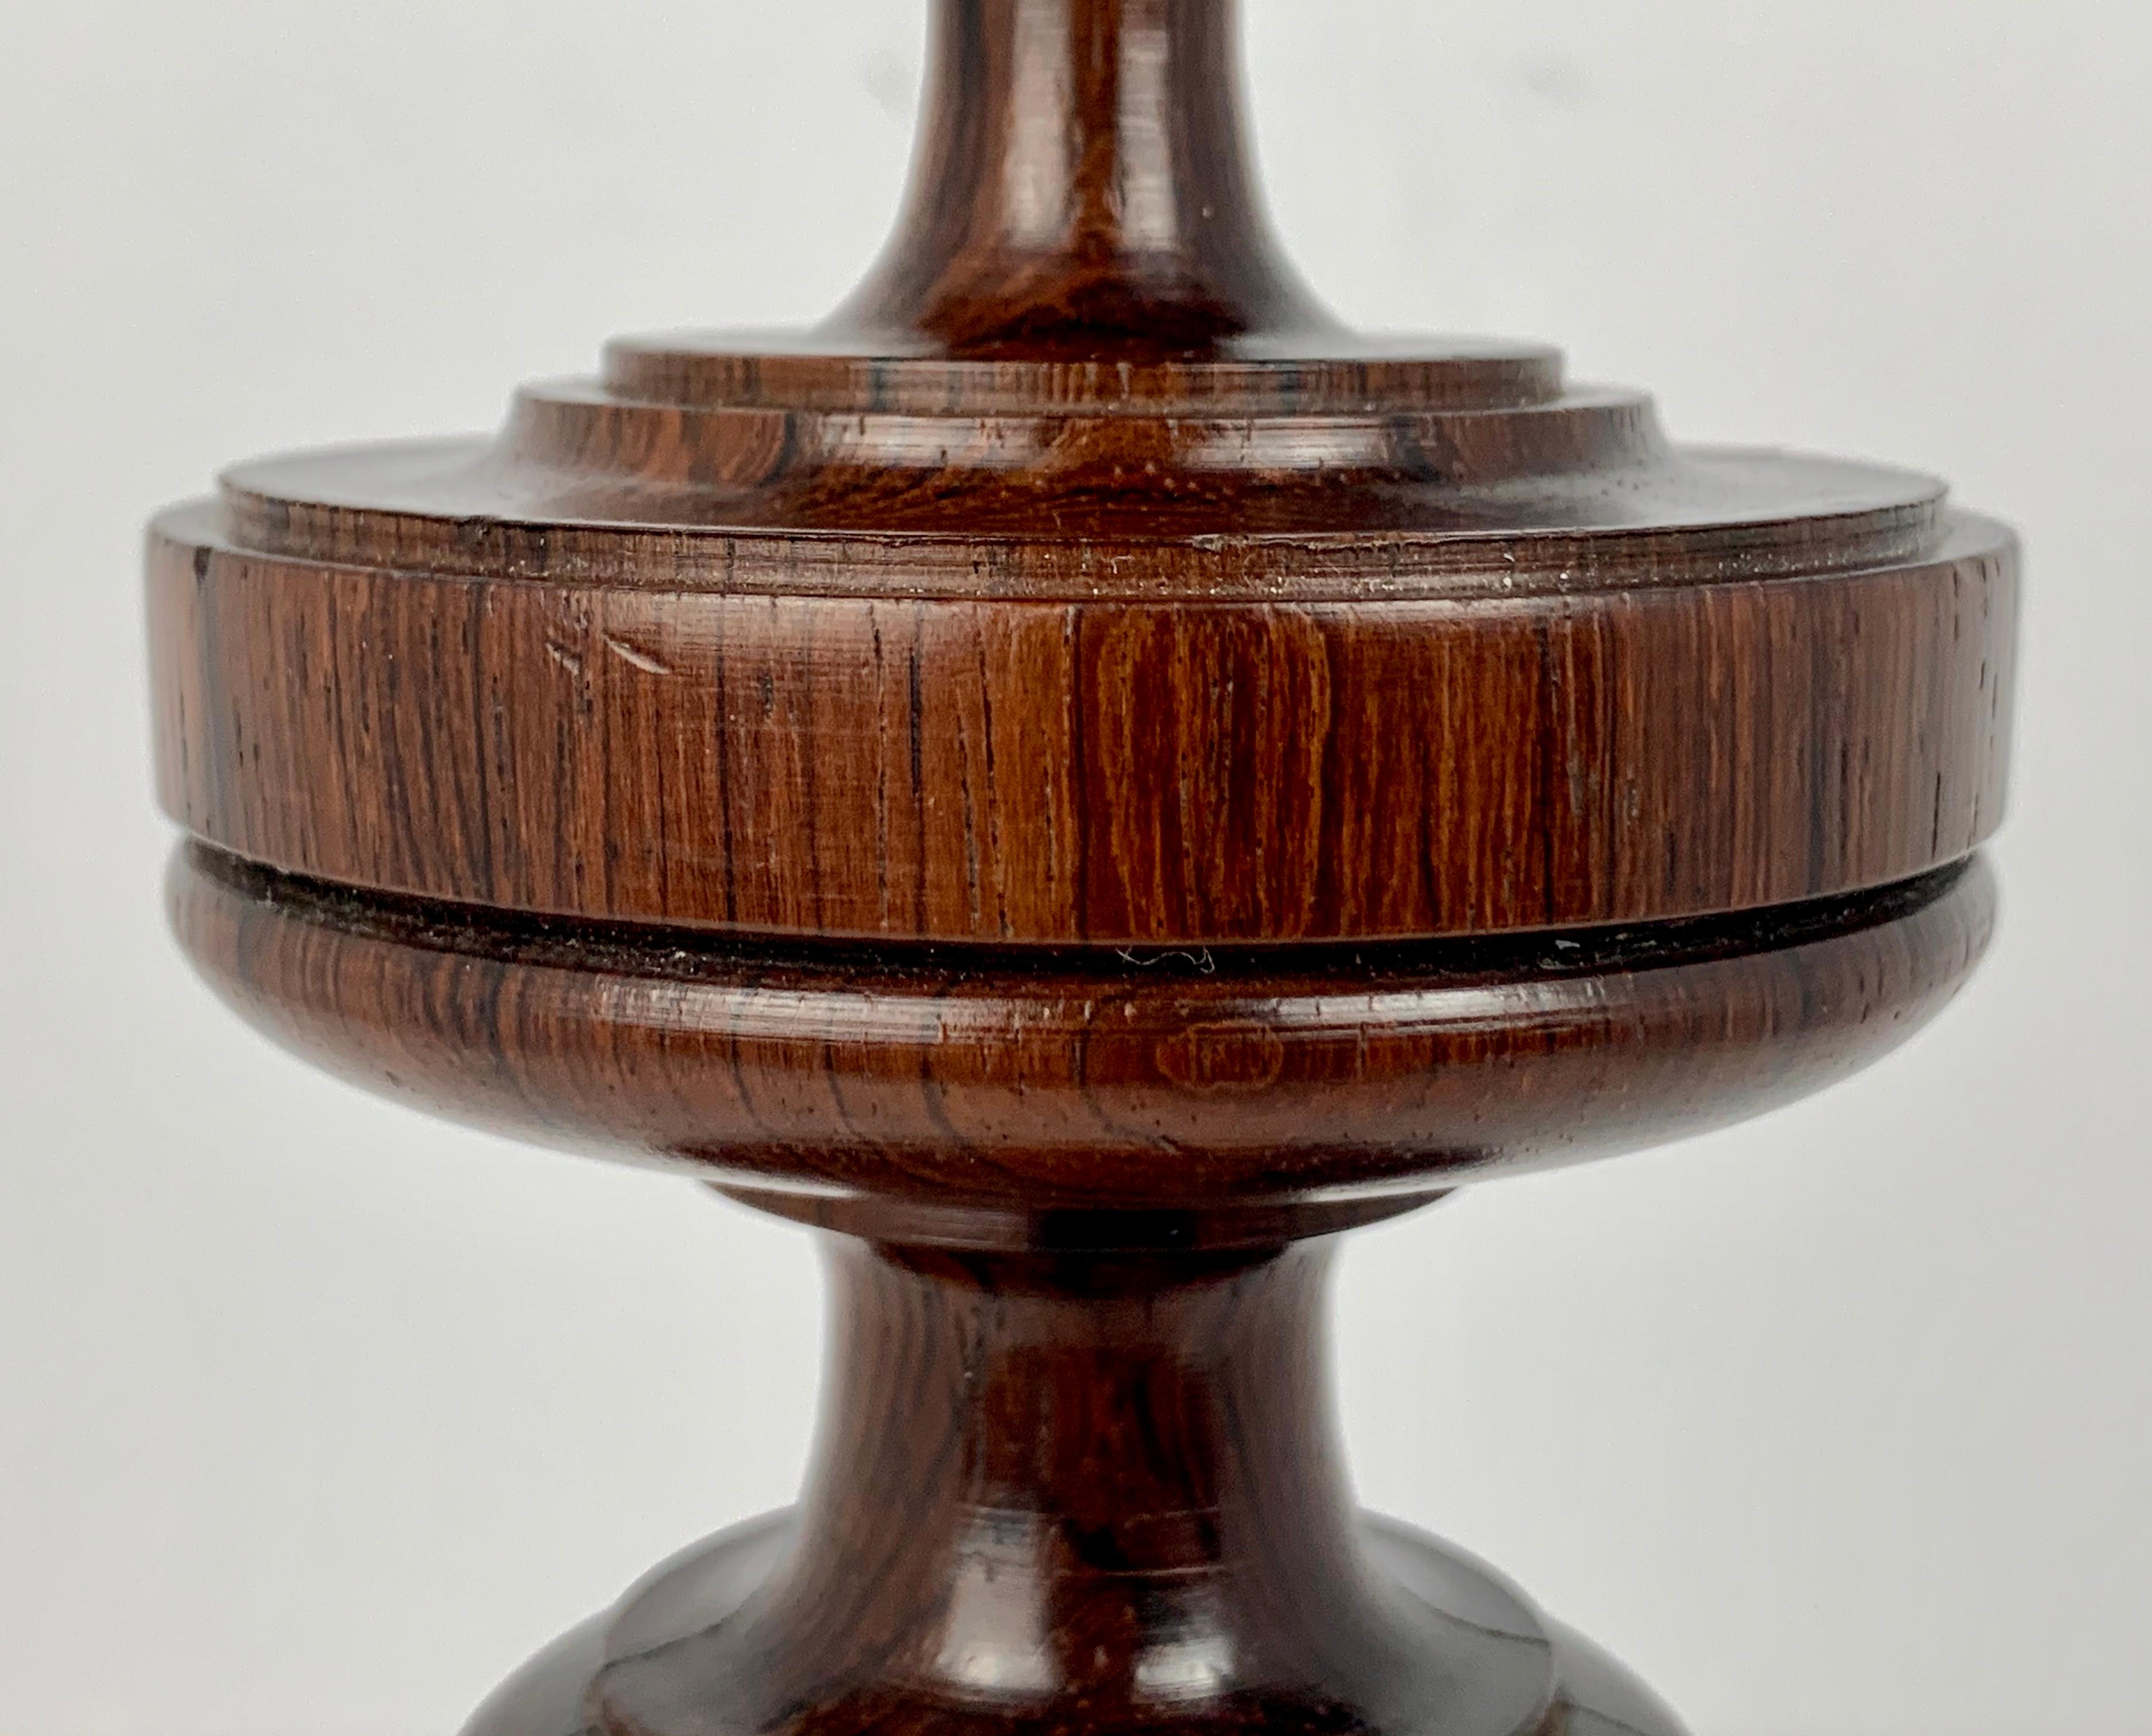 English Rosewood Finial Mounted on a Custom Lucite Pedestal-American, 19 th c.